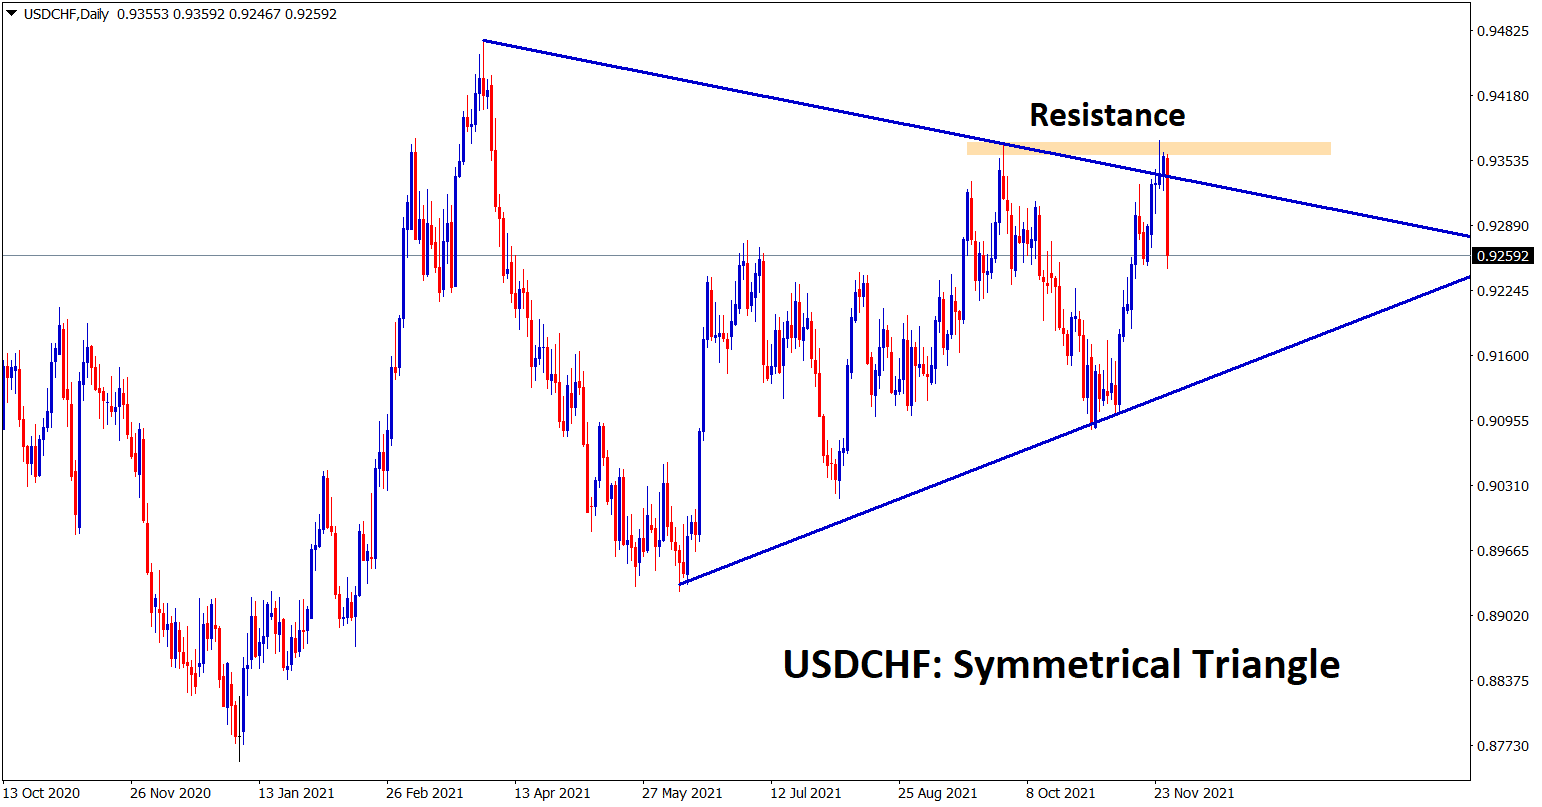 USDCHF fell from the horizontal resistance and the top of the symmetrical triangle in the daily timeframe chart